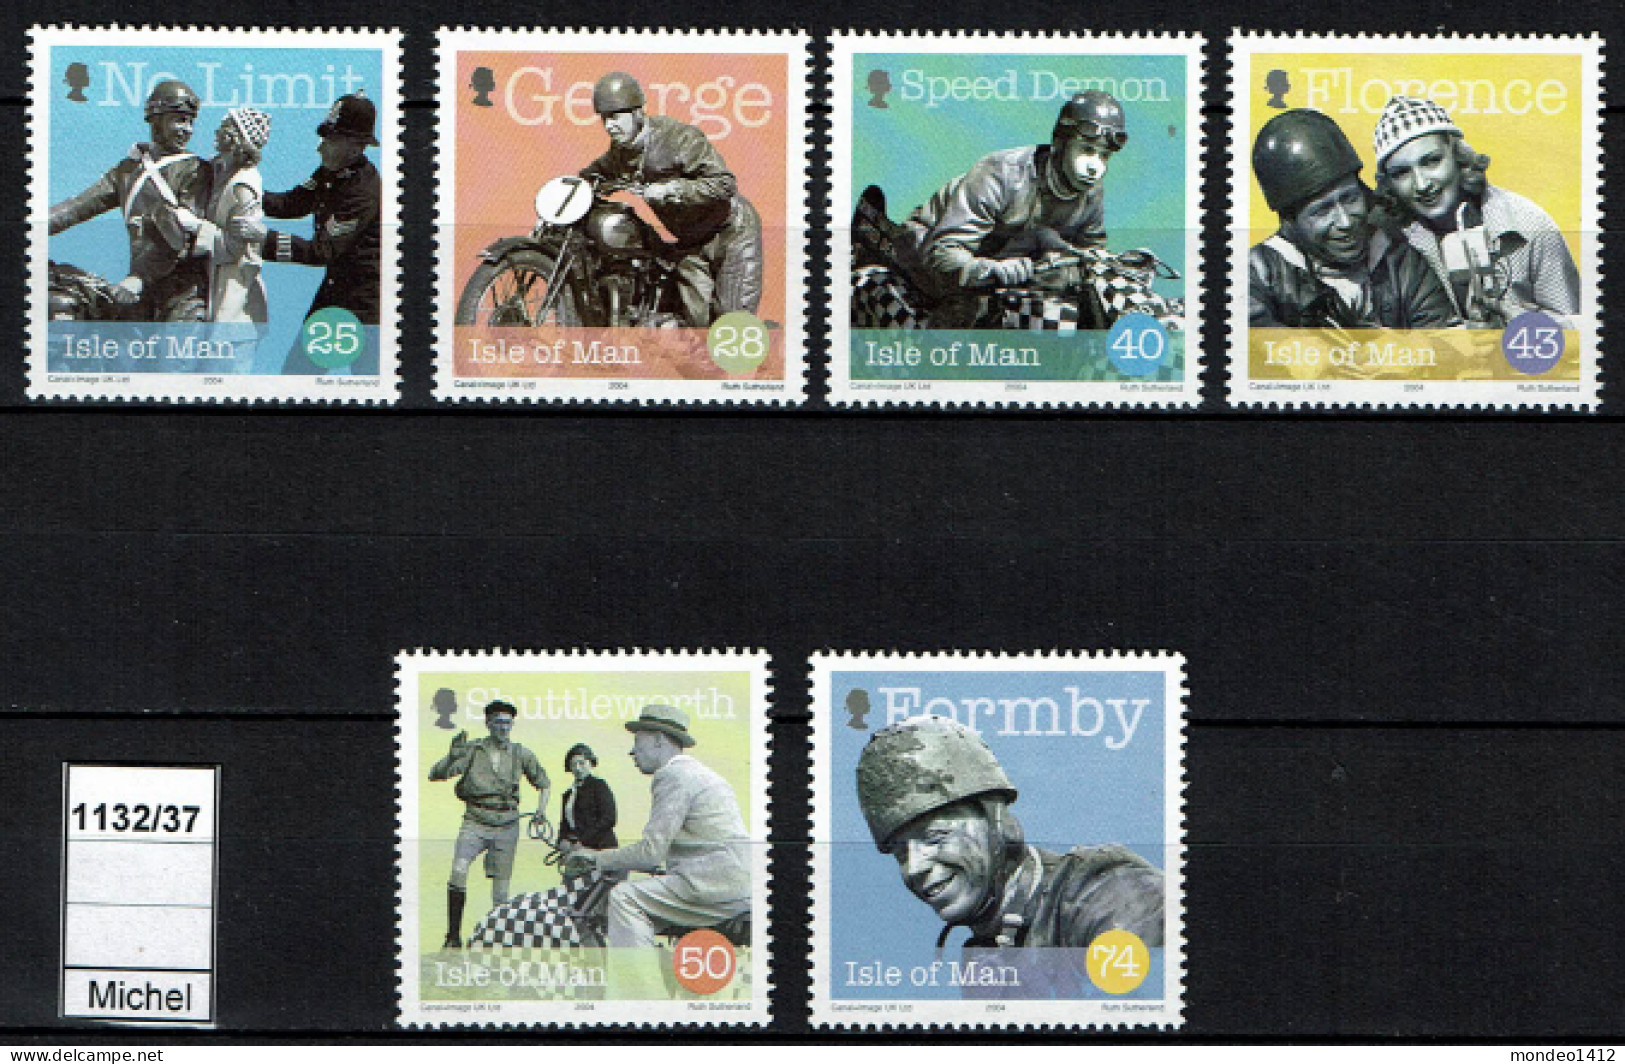 Isle Of Man - 2004 - MNH - Cinéma, Motorcycle, George Formby - English Actor, Singer-songwriter And Comedian - Man (Insel)